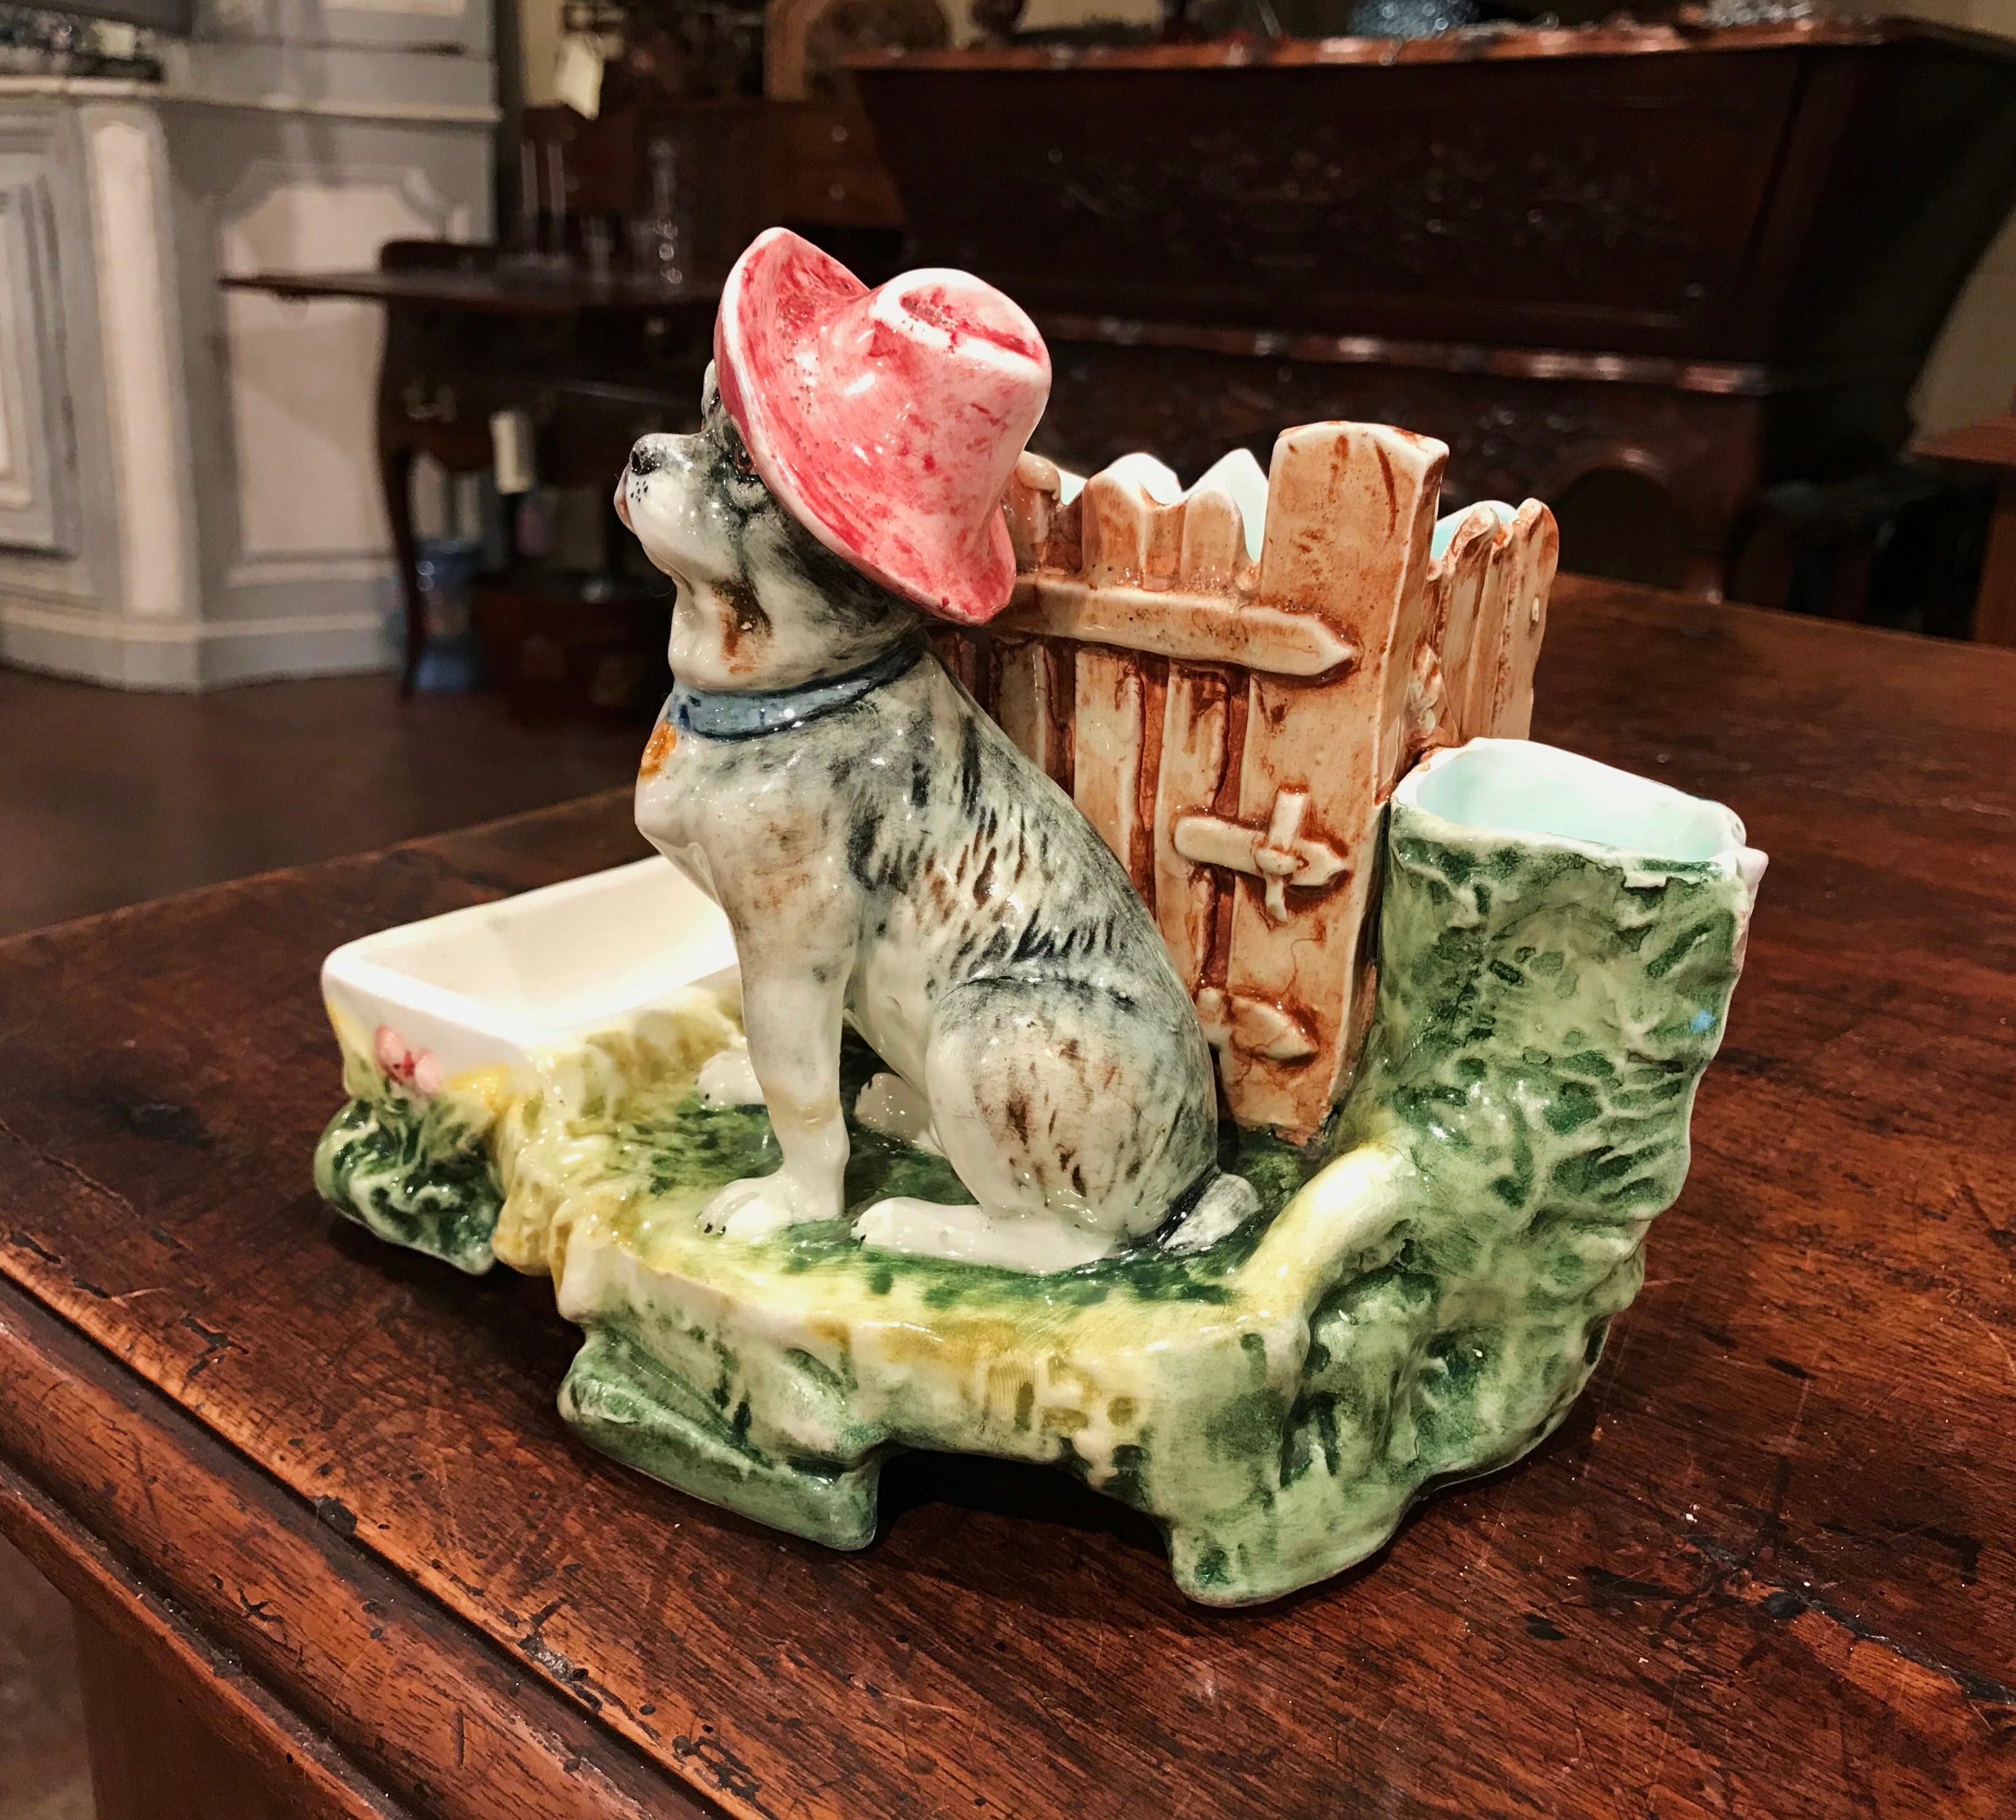 Animate your mantel (fireplace) or side table with this charming antique Majolica composition. Crafted in France circa 1890, the match safe sculpture features a bulldog wearing a hat with match and cigarette compartments on both side. The playful